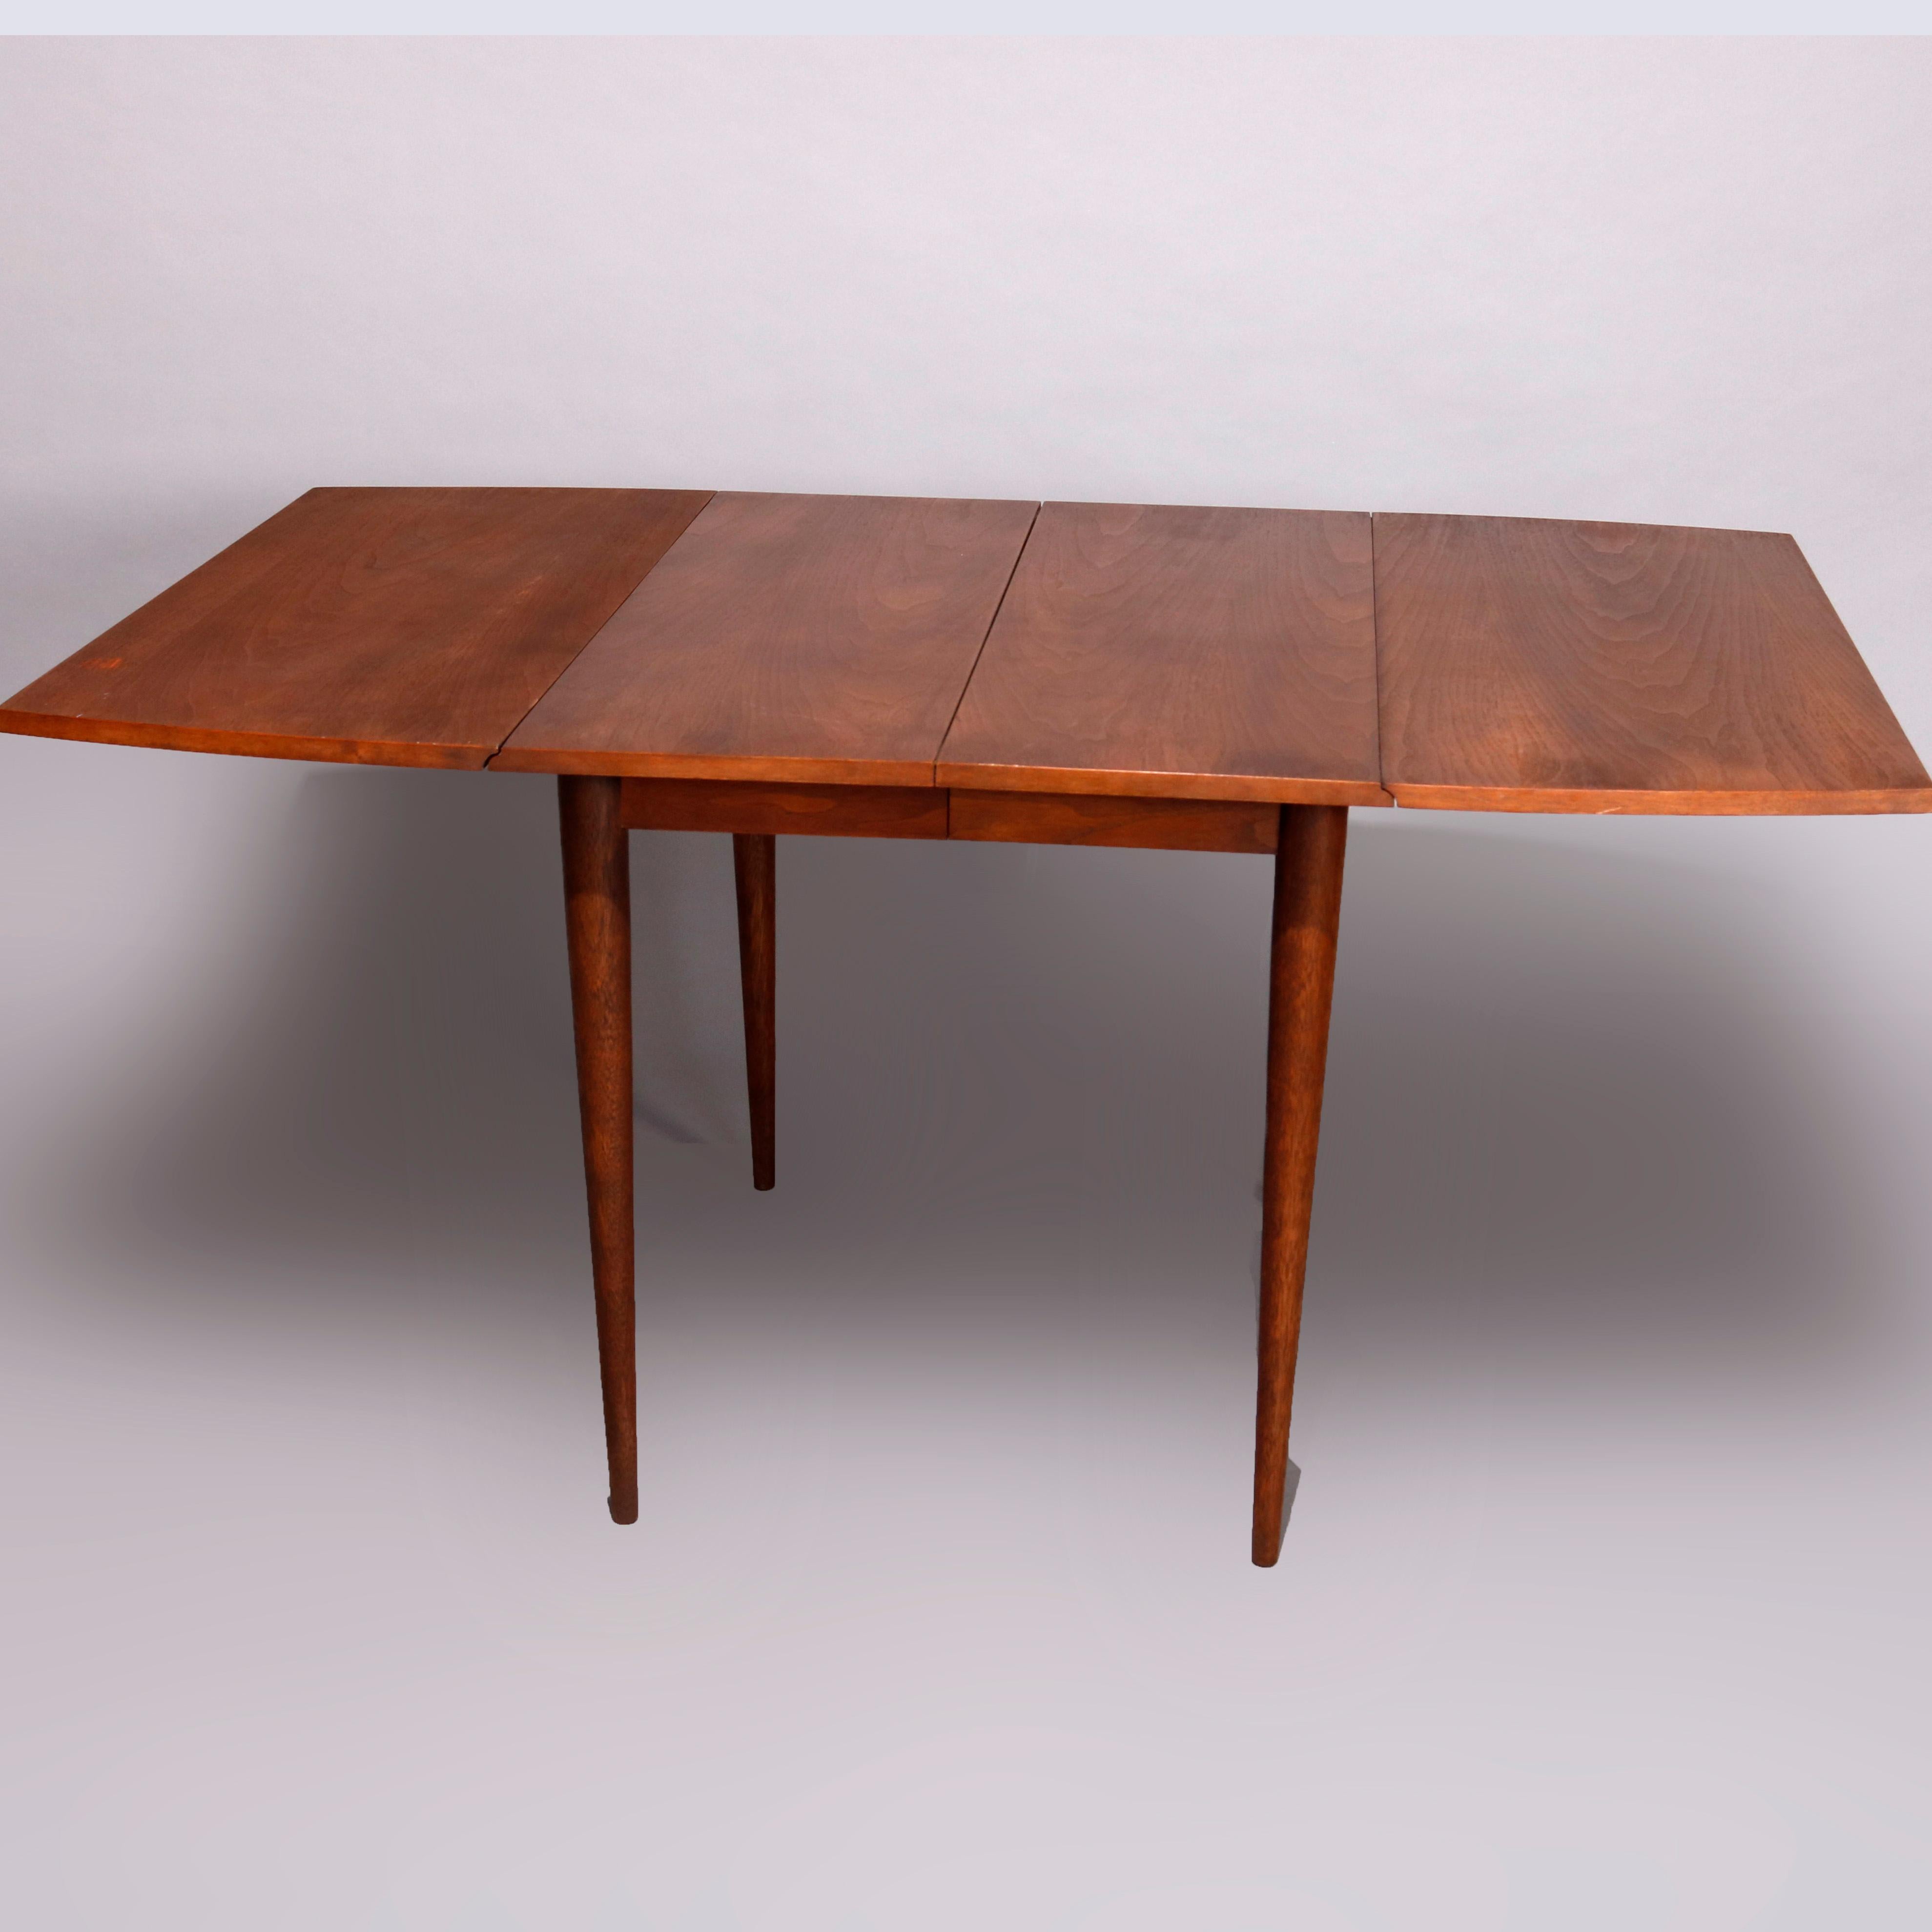 American Midcentury Danish Modern Walnut Dining Table & Chairs by Broyhill, 20th Century